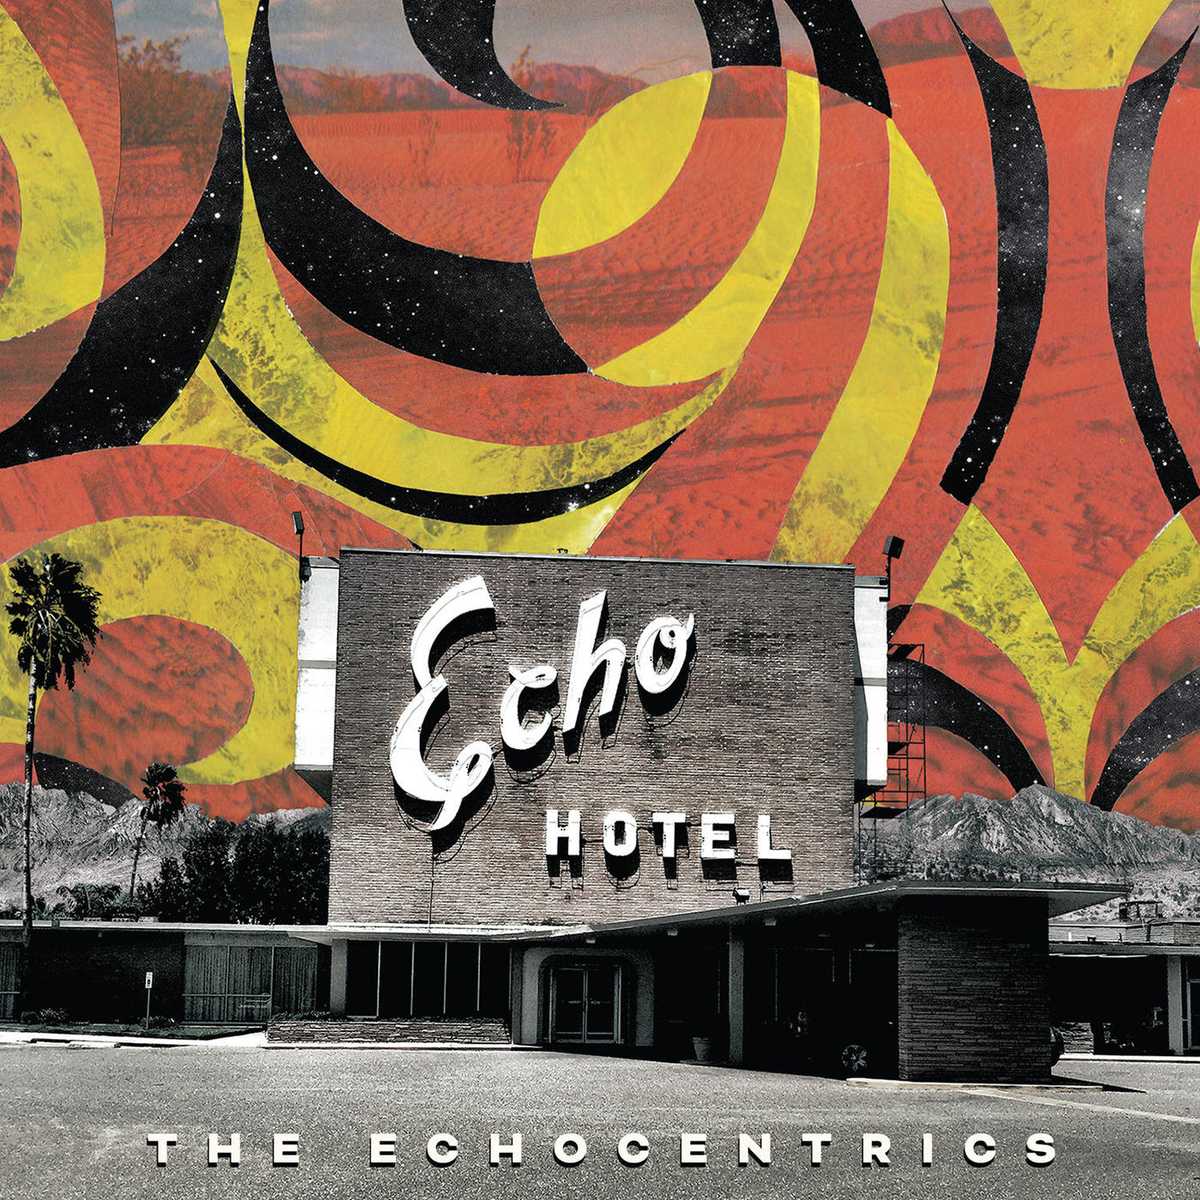 echocentric-echo-hotel-review-mixgrill-albums